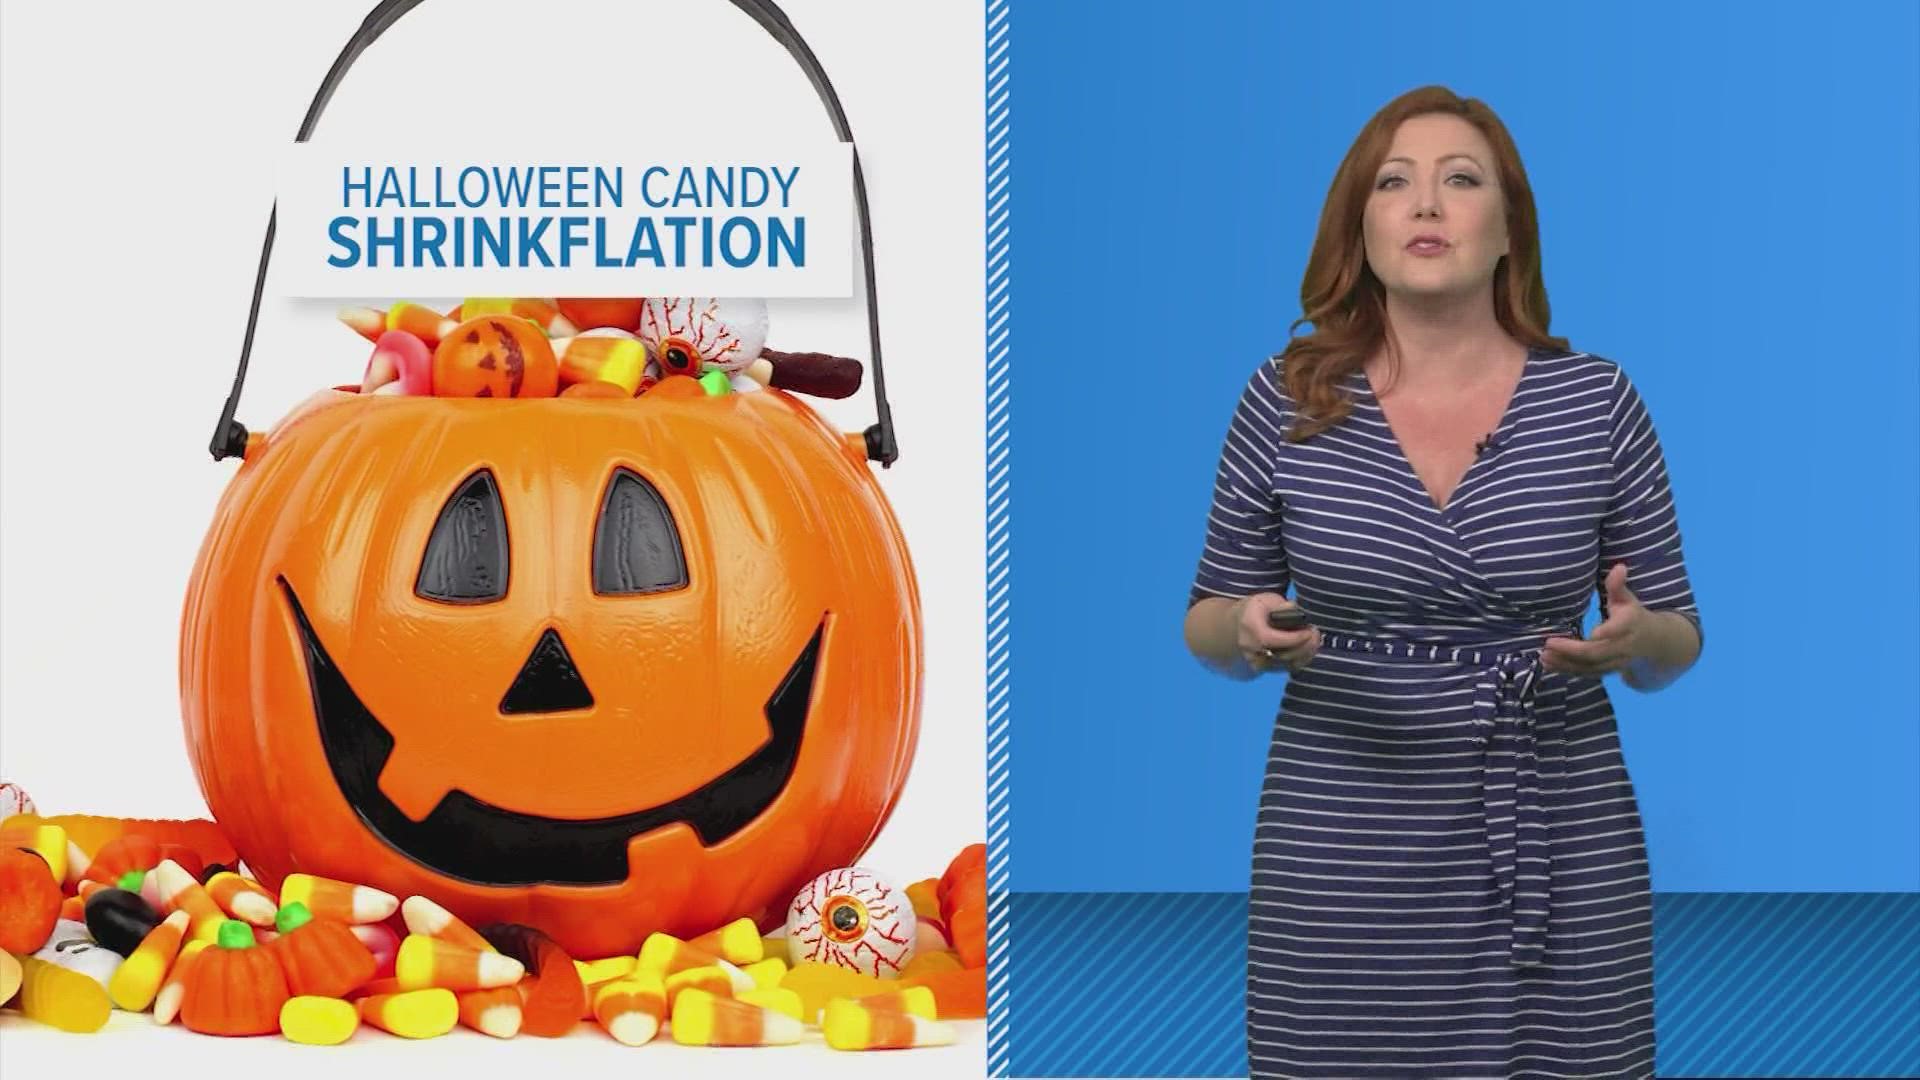 Halloween treats are getting smaller. Brandi Smith explains why.